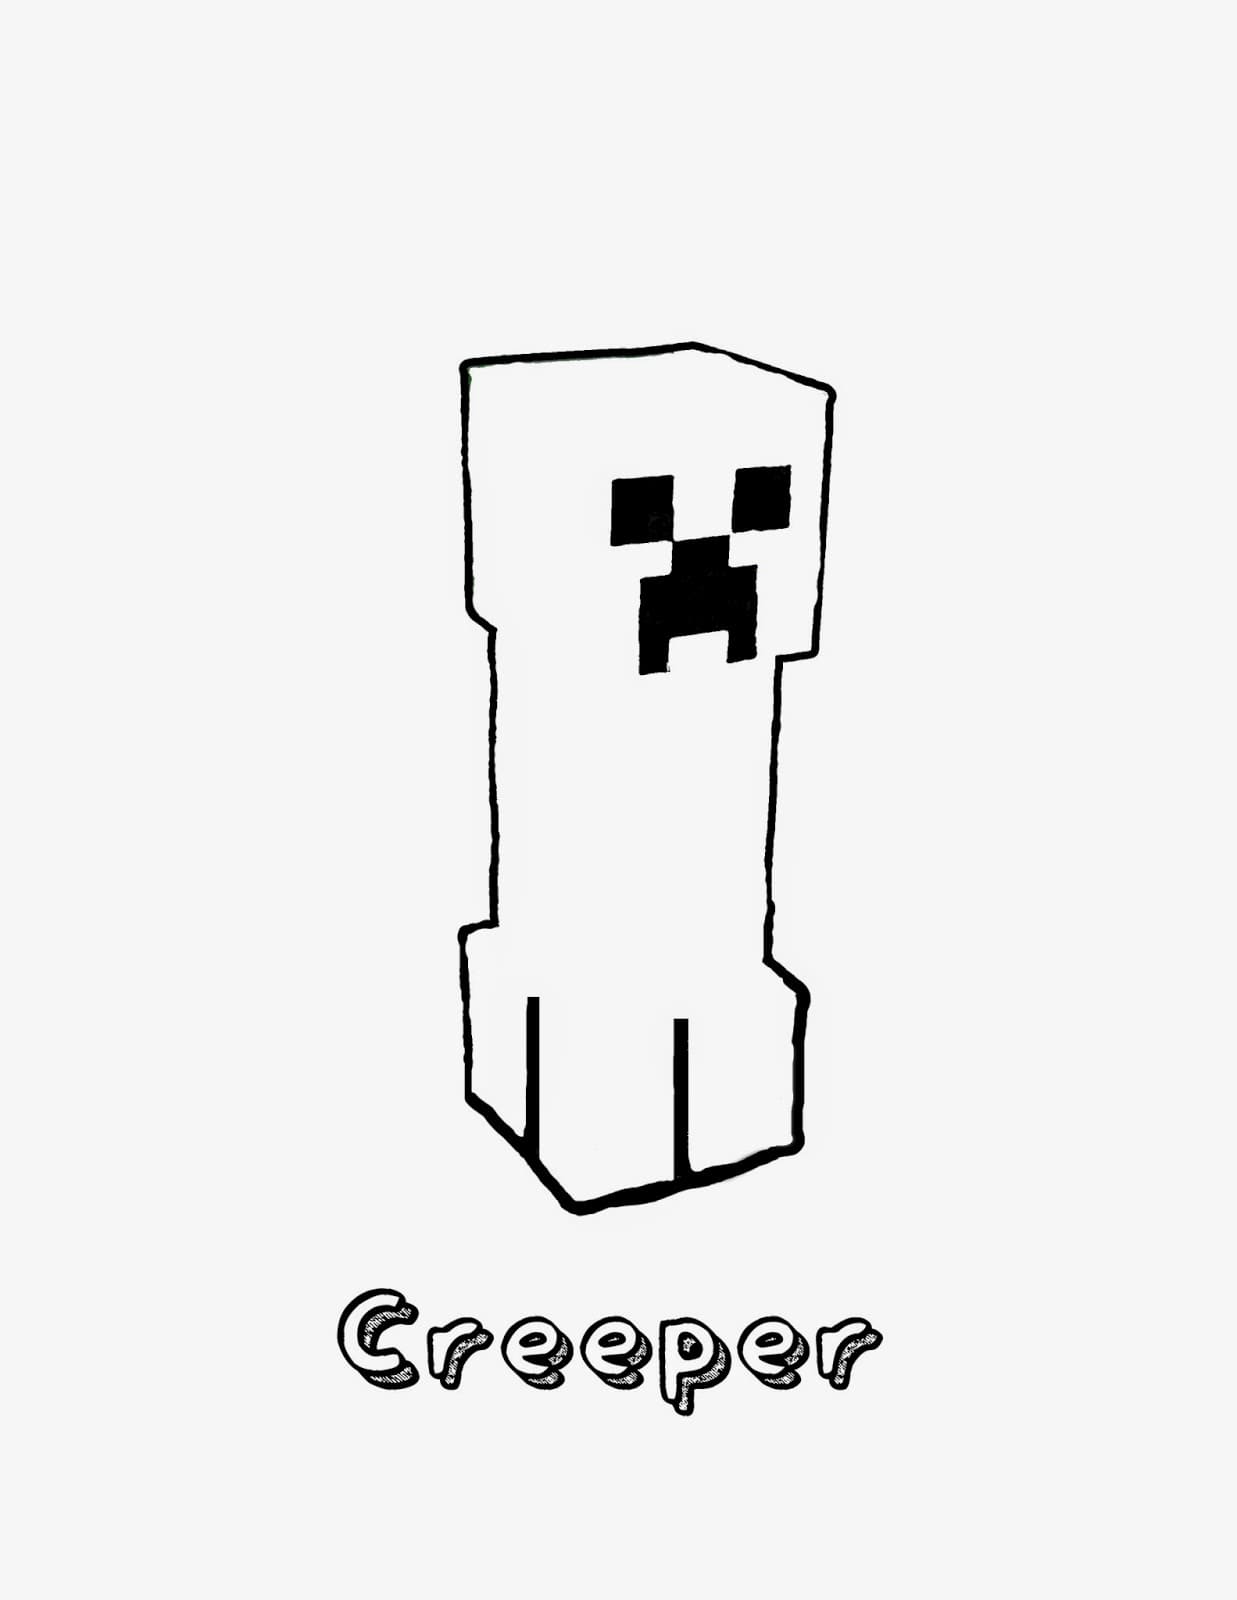 Minecraft Creeper Image For Kids